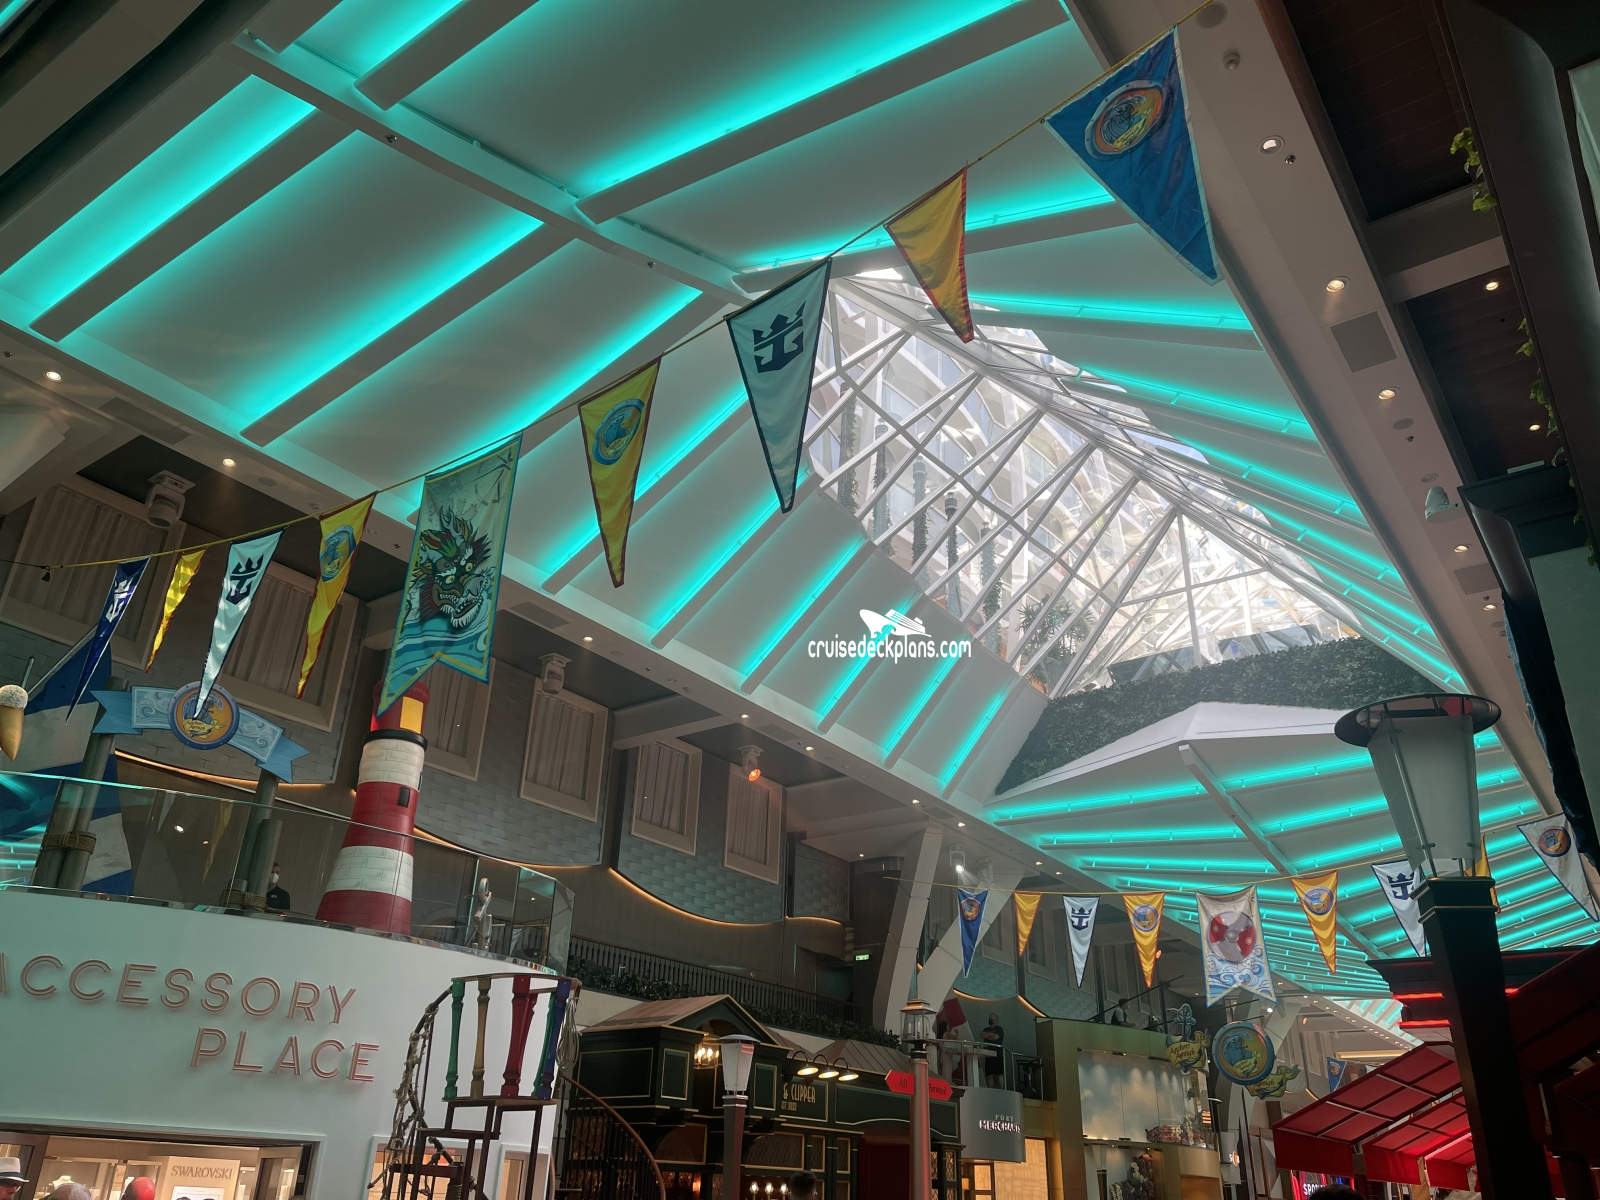 Wonder of the Seas Royal Promenade and Shops Pictures